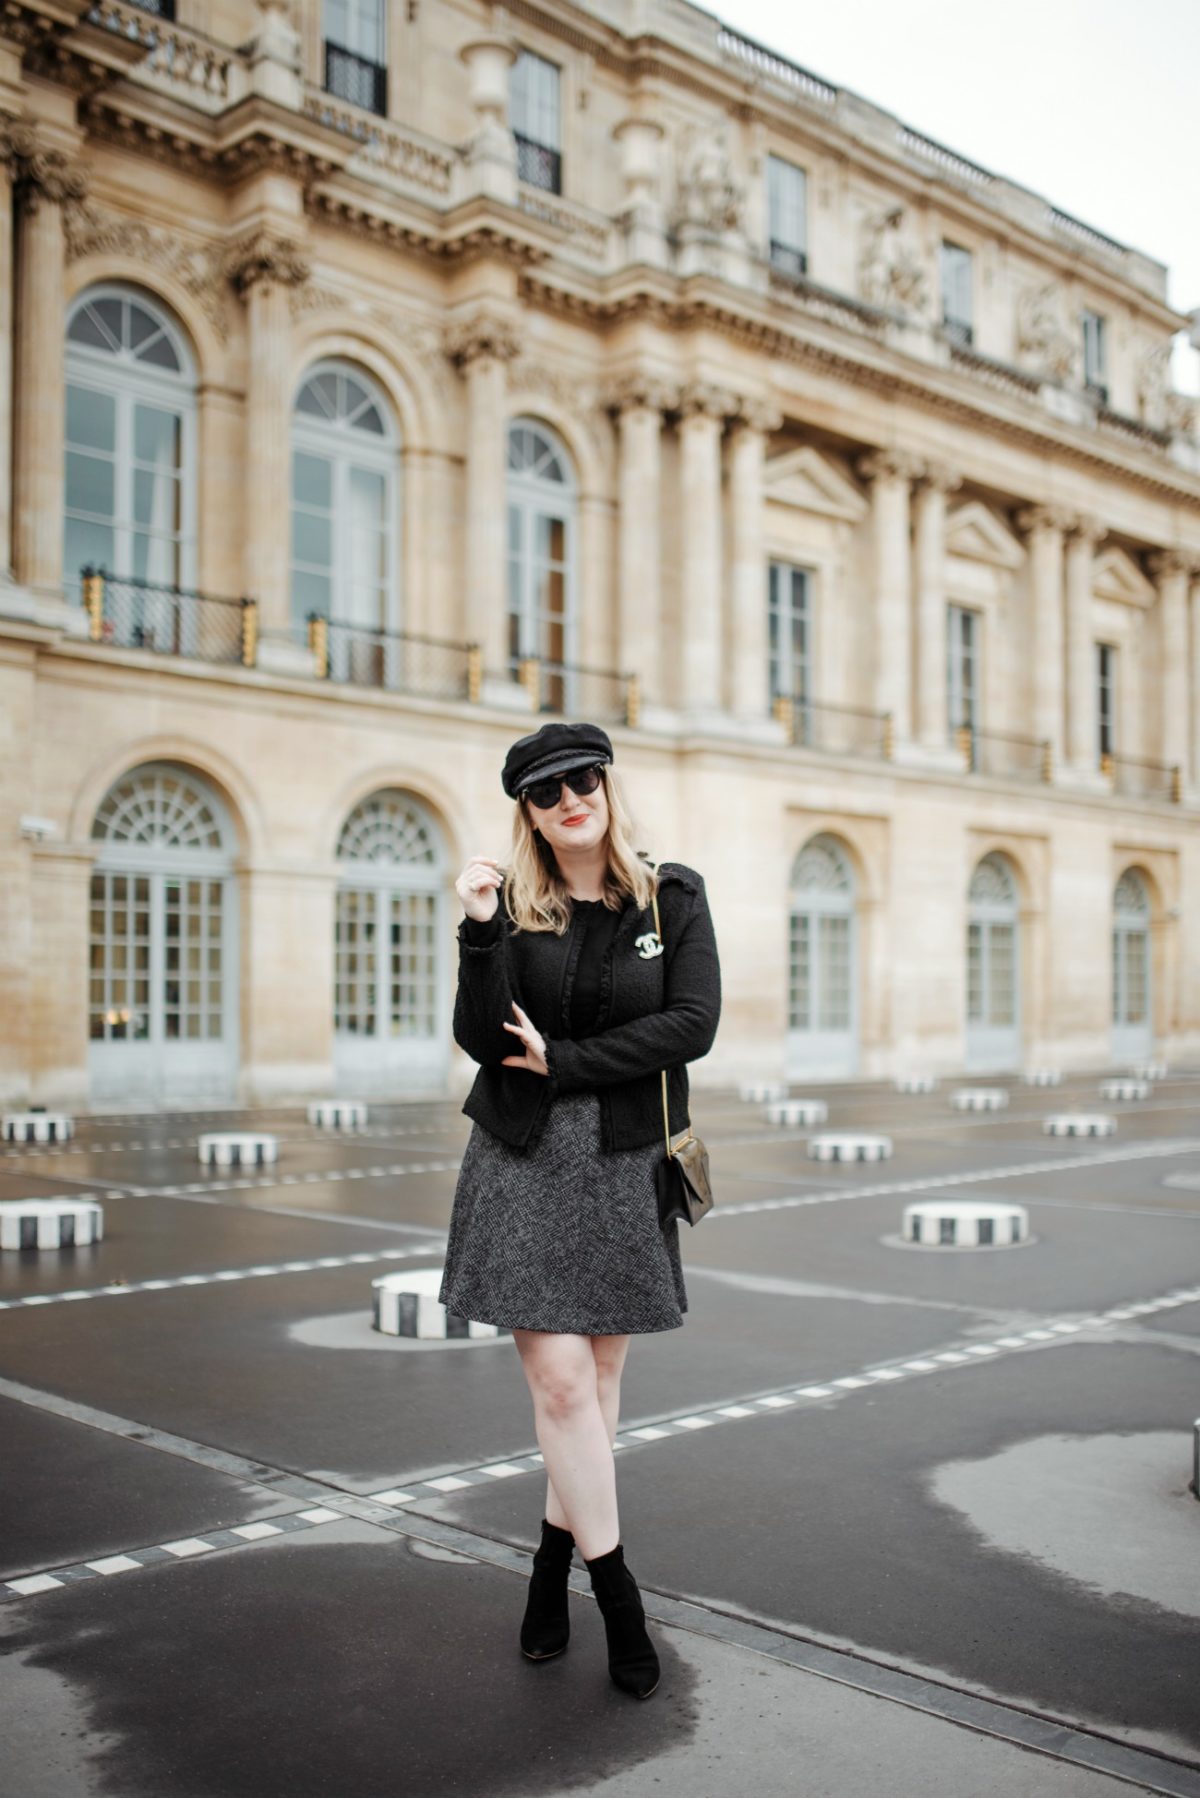 3 Perfect Days in Paris - wit & whimsy | Lifestyle Blog